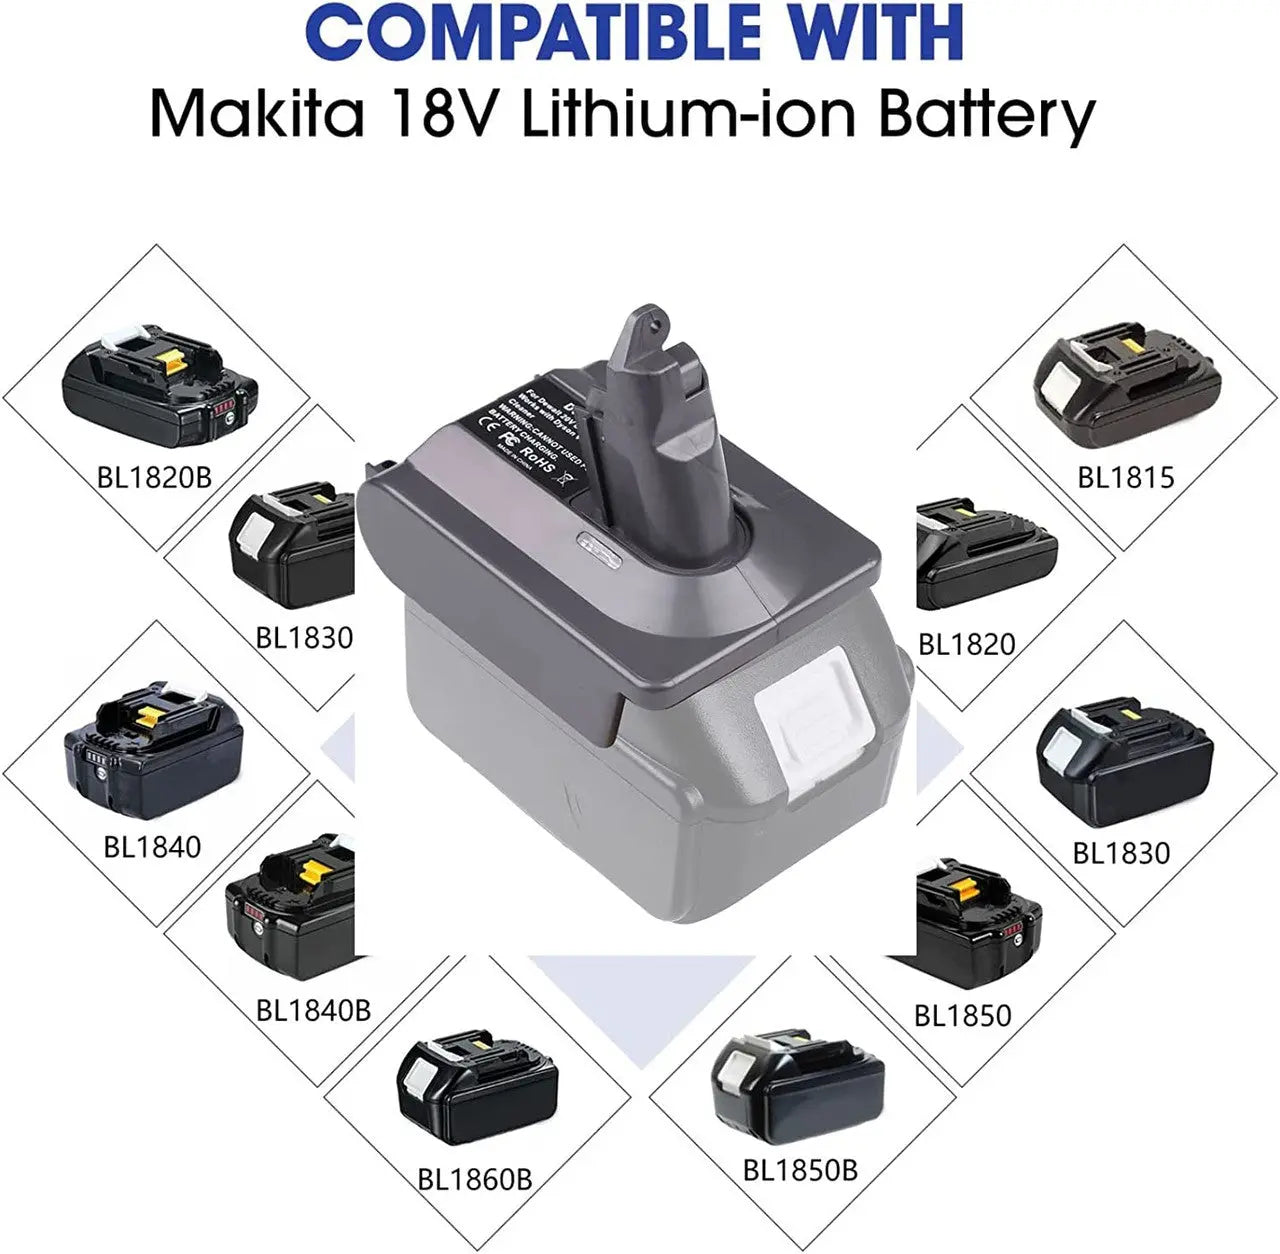 Makita 18V To Dyson V6, DC58 & DC59 Battery Converter / Adapter from Deals499 at Deals499